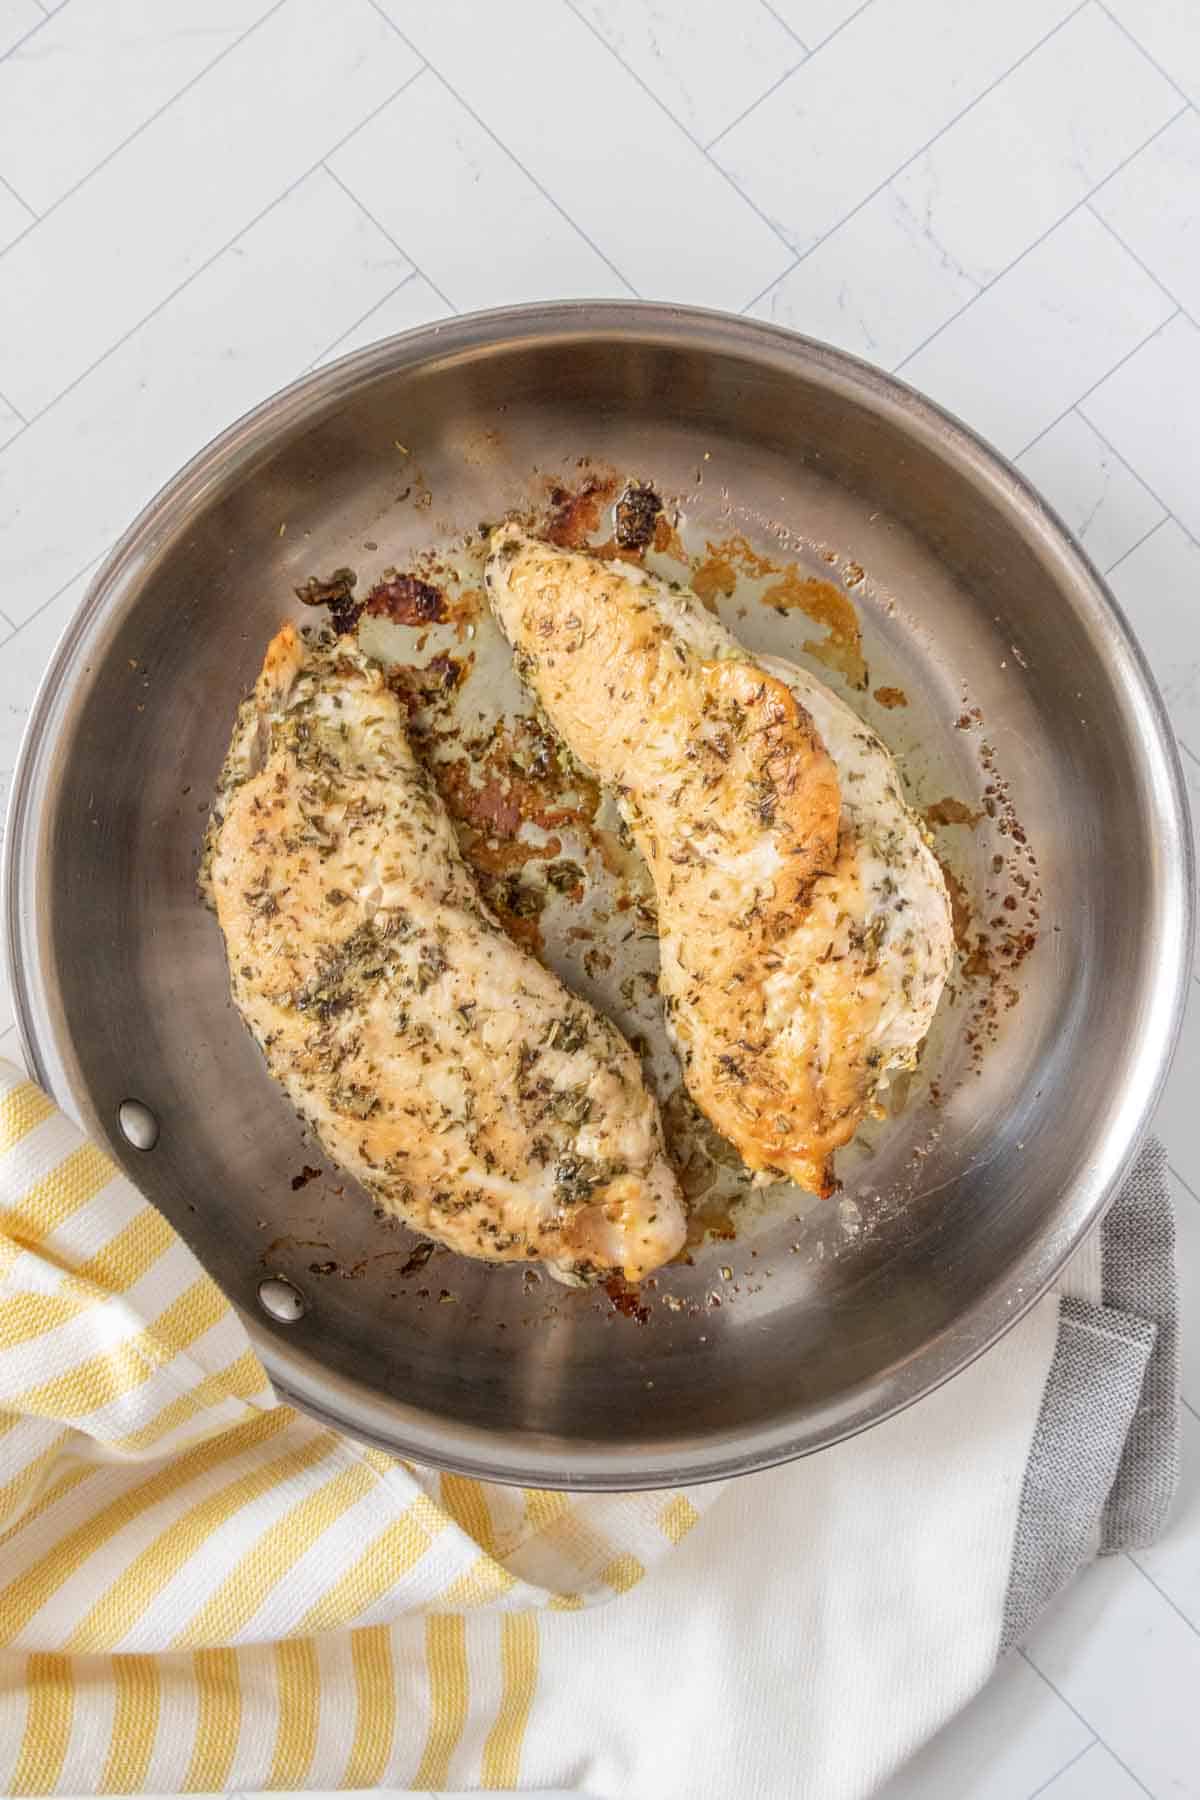 Turkey tenderloins in a skillet on a white tablecloth.